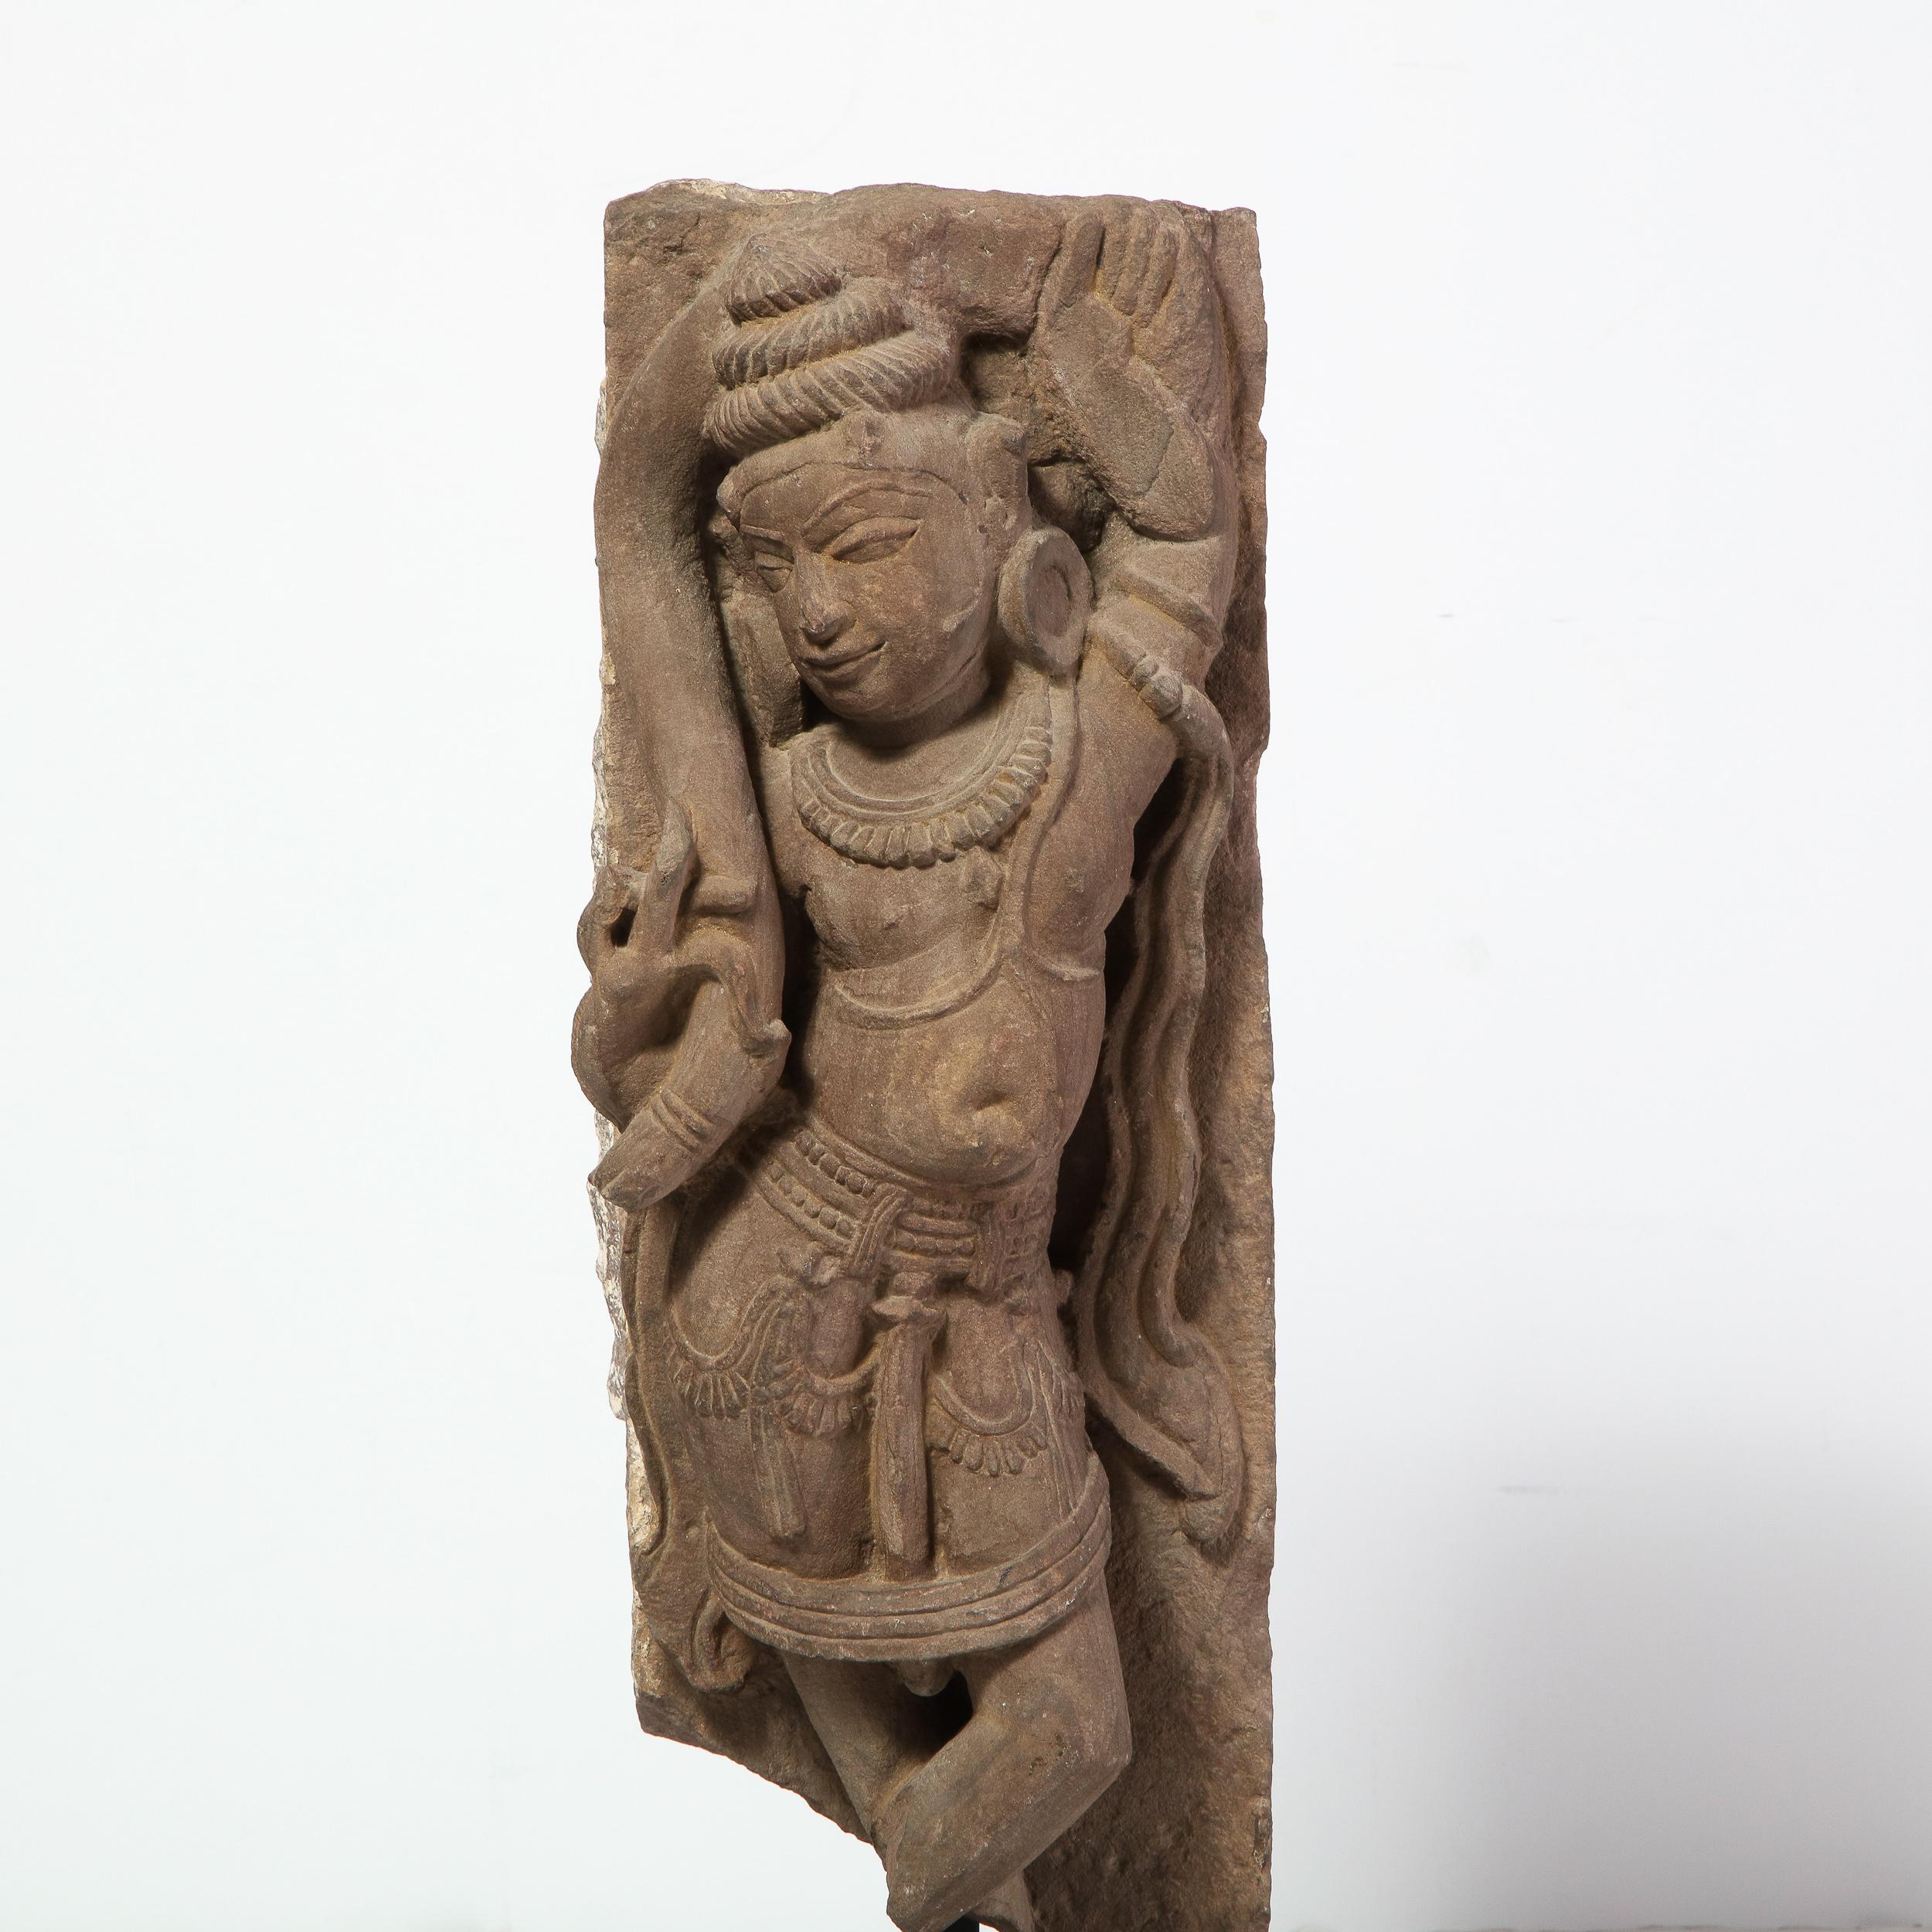 This stunning sandstone stele figure fragment was realized in India, during the 13th century. It offers an intricately carved Stele figure of a dancing goddess in sandstone. The female form appears to have her hips torqued and her legs subtly